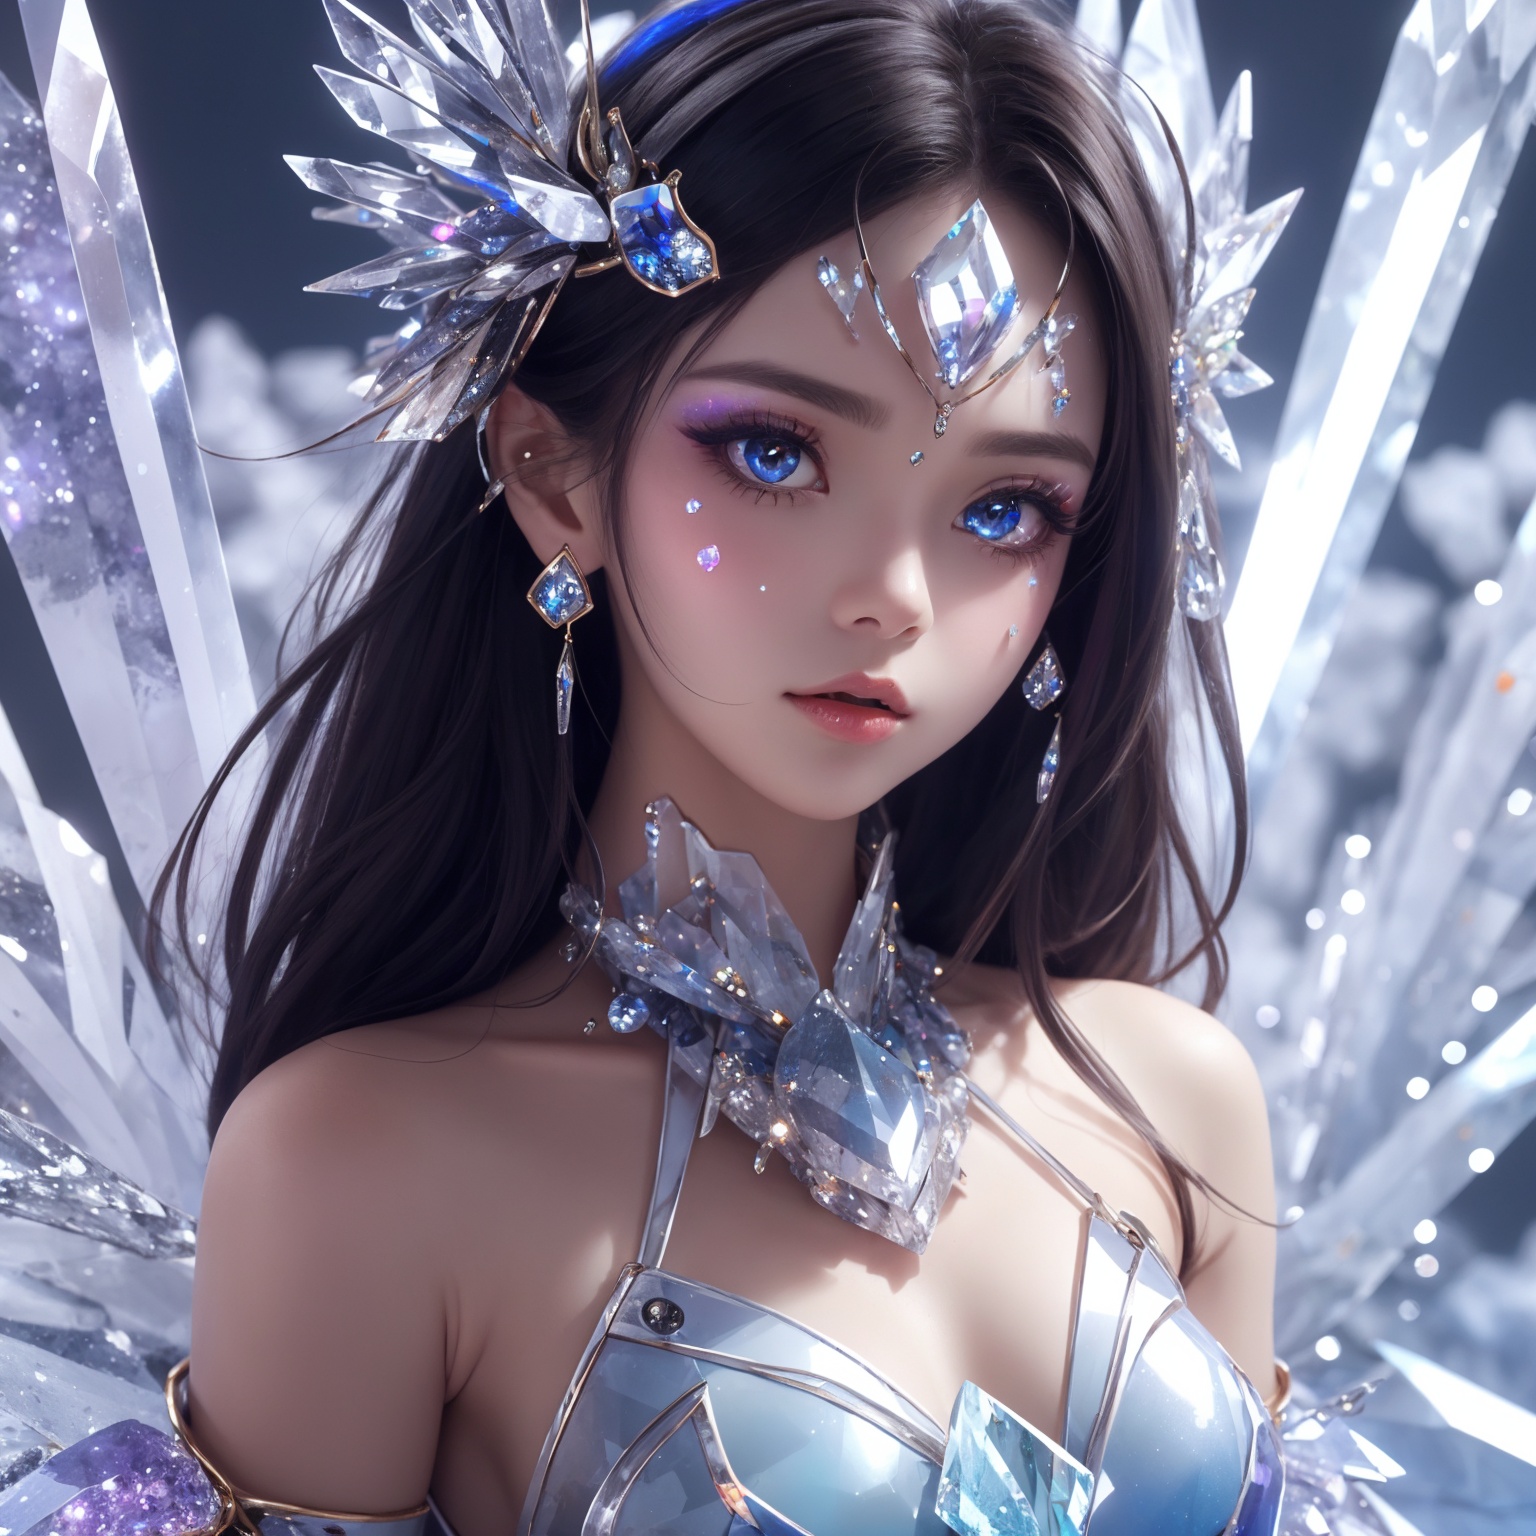 masterpiece,best quality,masterpiece,best quality,official art,extremely detailed CG unity 16k wallpaper,masterpiece,((1girl)),(science fiction:1.1),(ultra-detailed crystallization:1.5),(crystallizing girl:1.5),kaleidoscope,((iridescent:1.5) long hair),(glittering silver eyes),sitting,surrounded by colorful crystals,blue skin,(skin fusion with crystal:1.8),looking up,face focus,simple dress,transparent crystals,flat dark background,lens flare,prism,